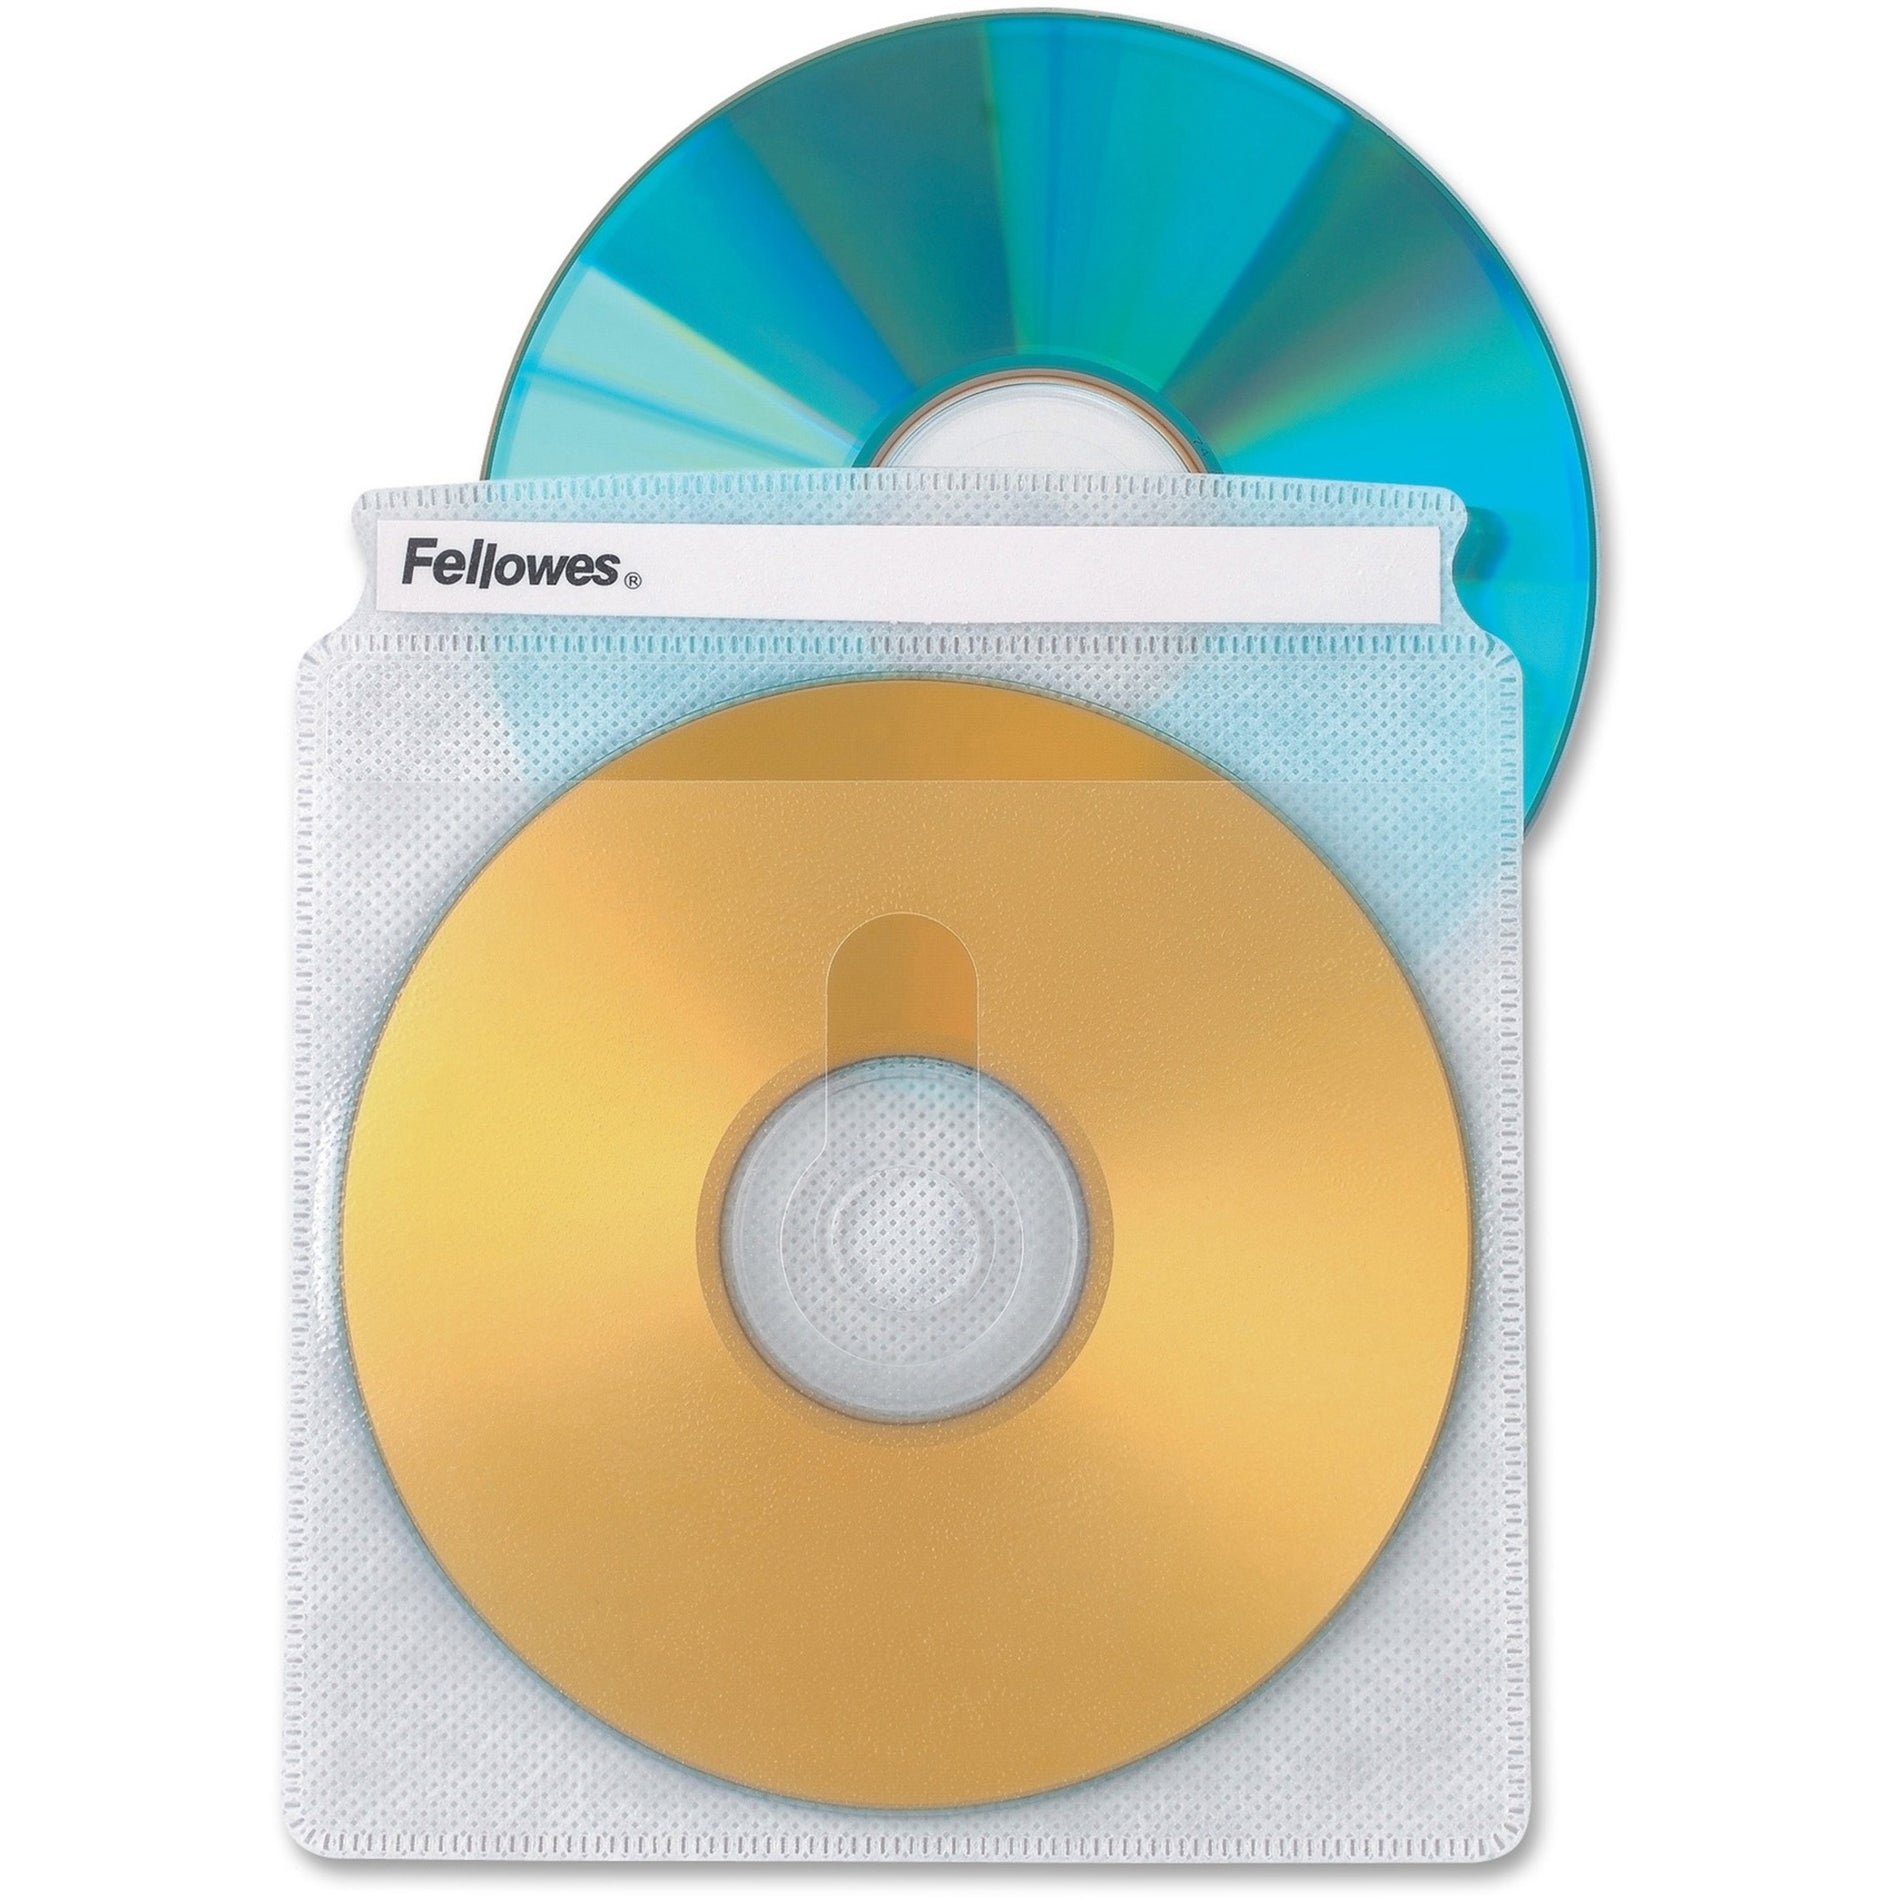 Fellowes 90659 Double-Sided CD/DVD Sleeves, 5"x5-3/4", 50/PK, Clear - Protect and Organize Your Discs